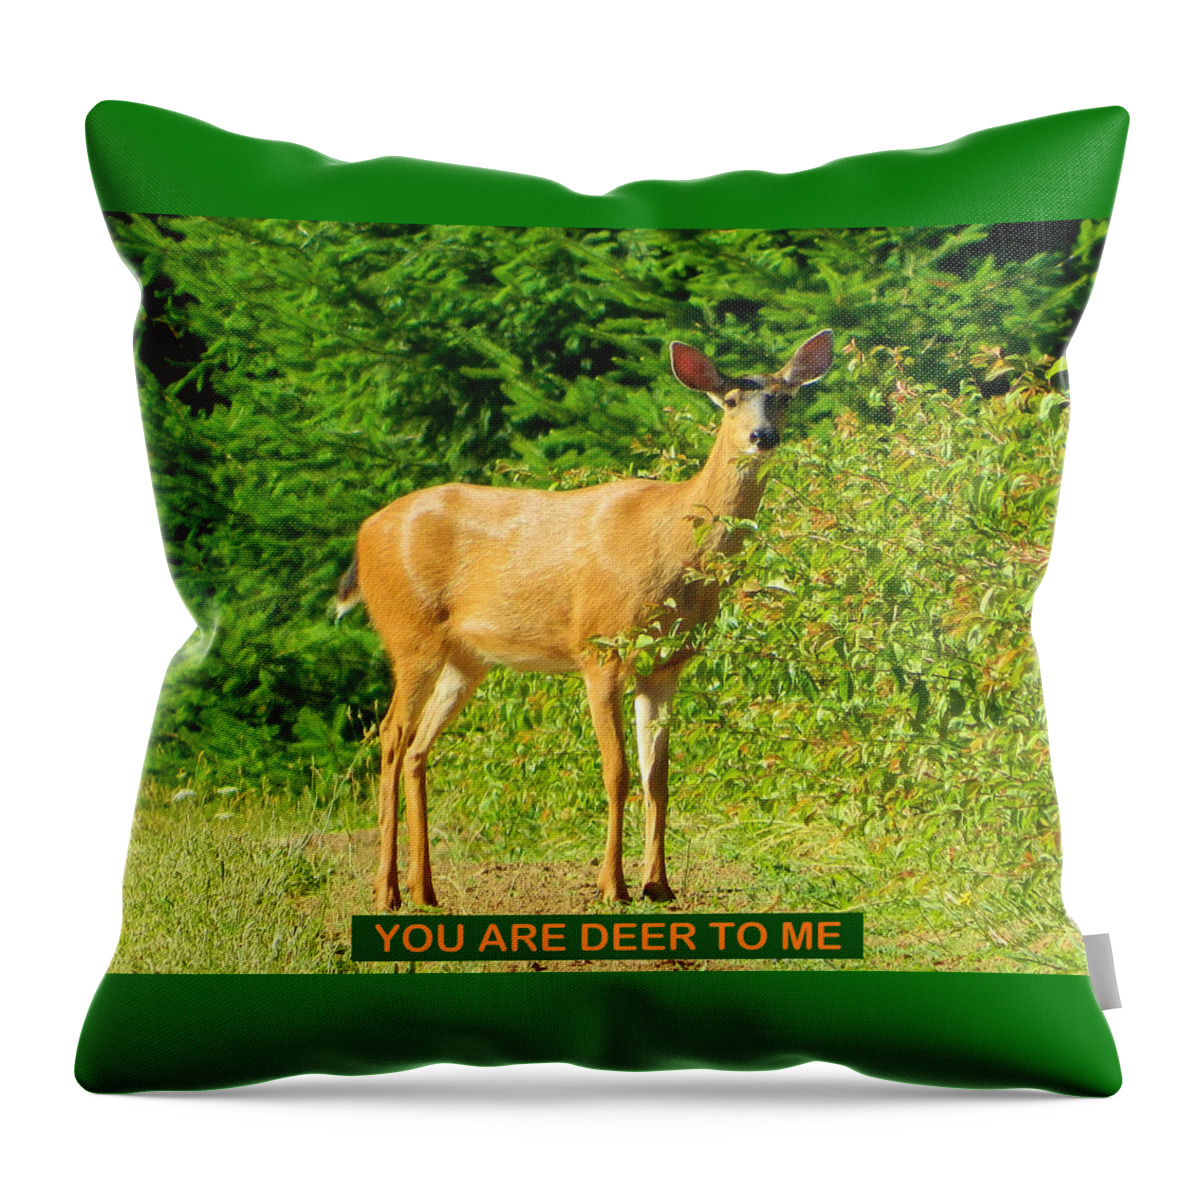 Deer Throw Pillow featuring the photograph Deer To Me by Gallery Of Hope 